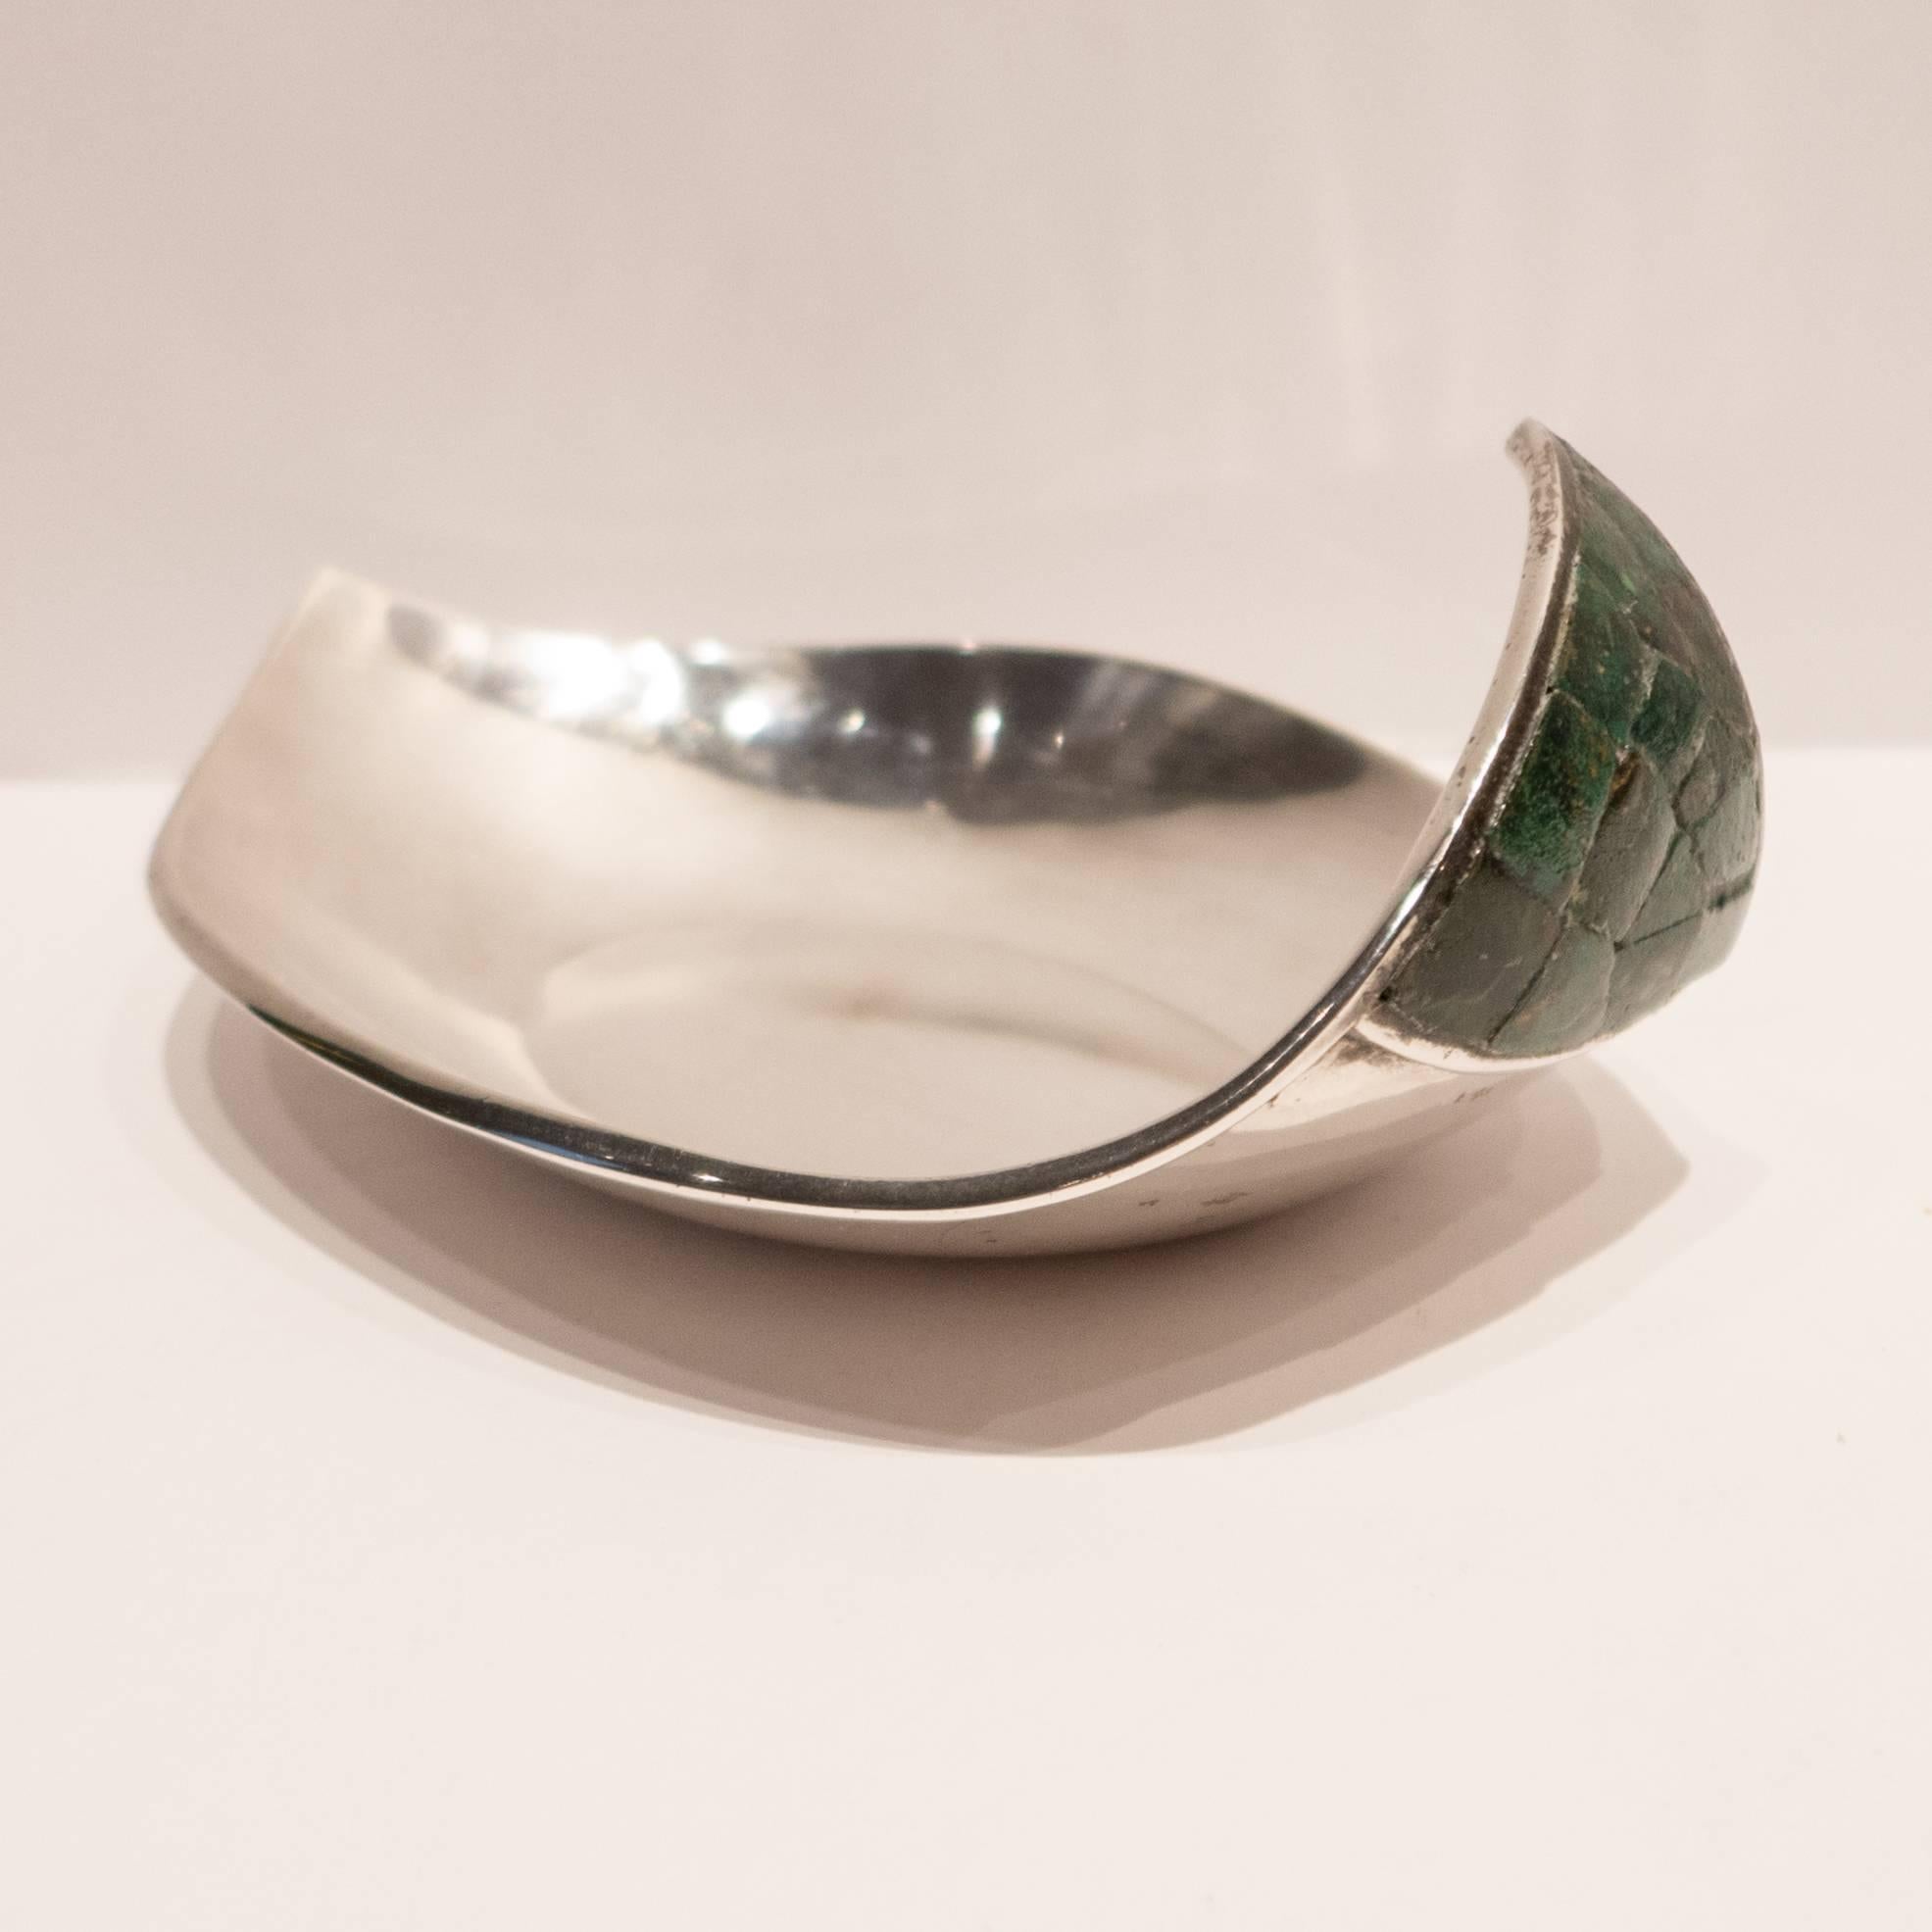 Eccentric-shaped Los Castillo midcentury silver plated dish with stone inlay (probably Malachite). With hallmarks, circa 1960.